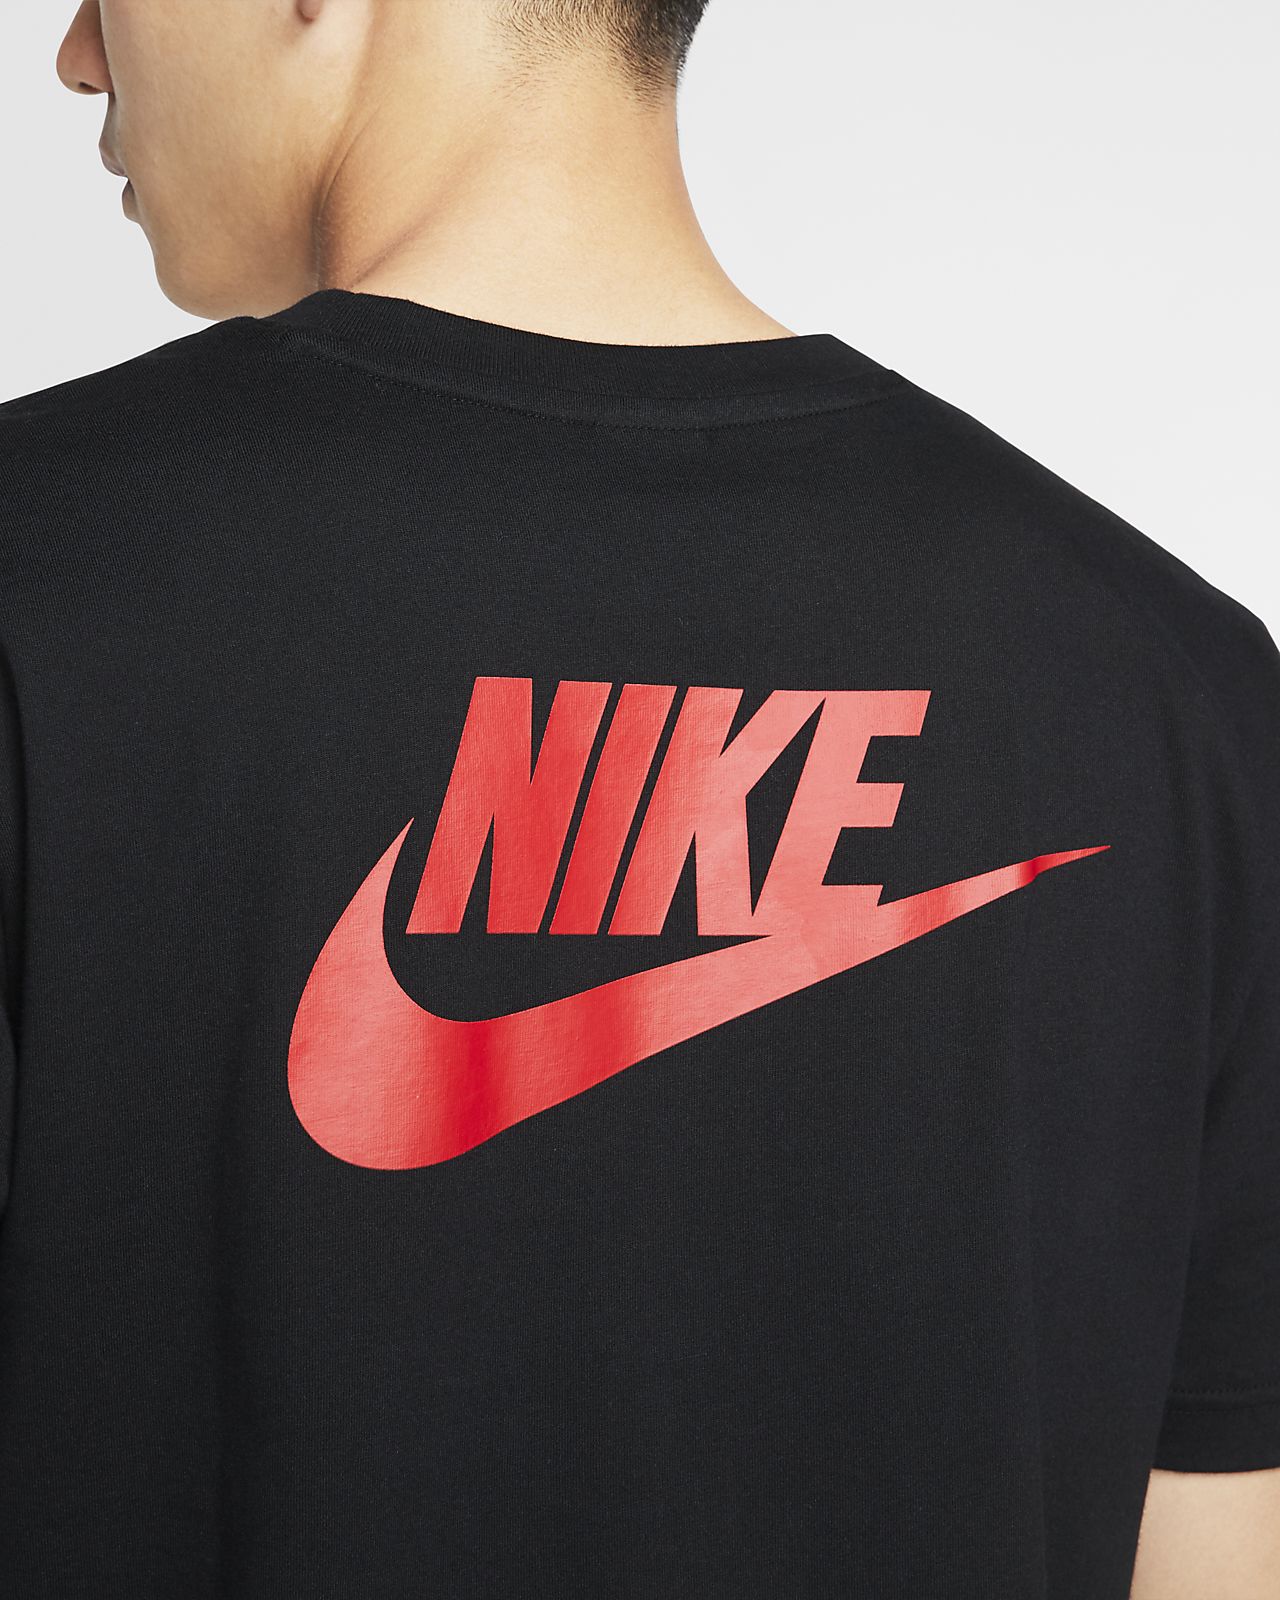 black and red nike clothes